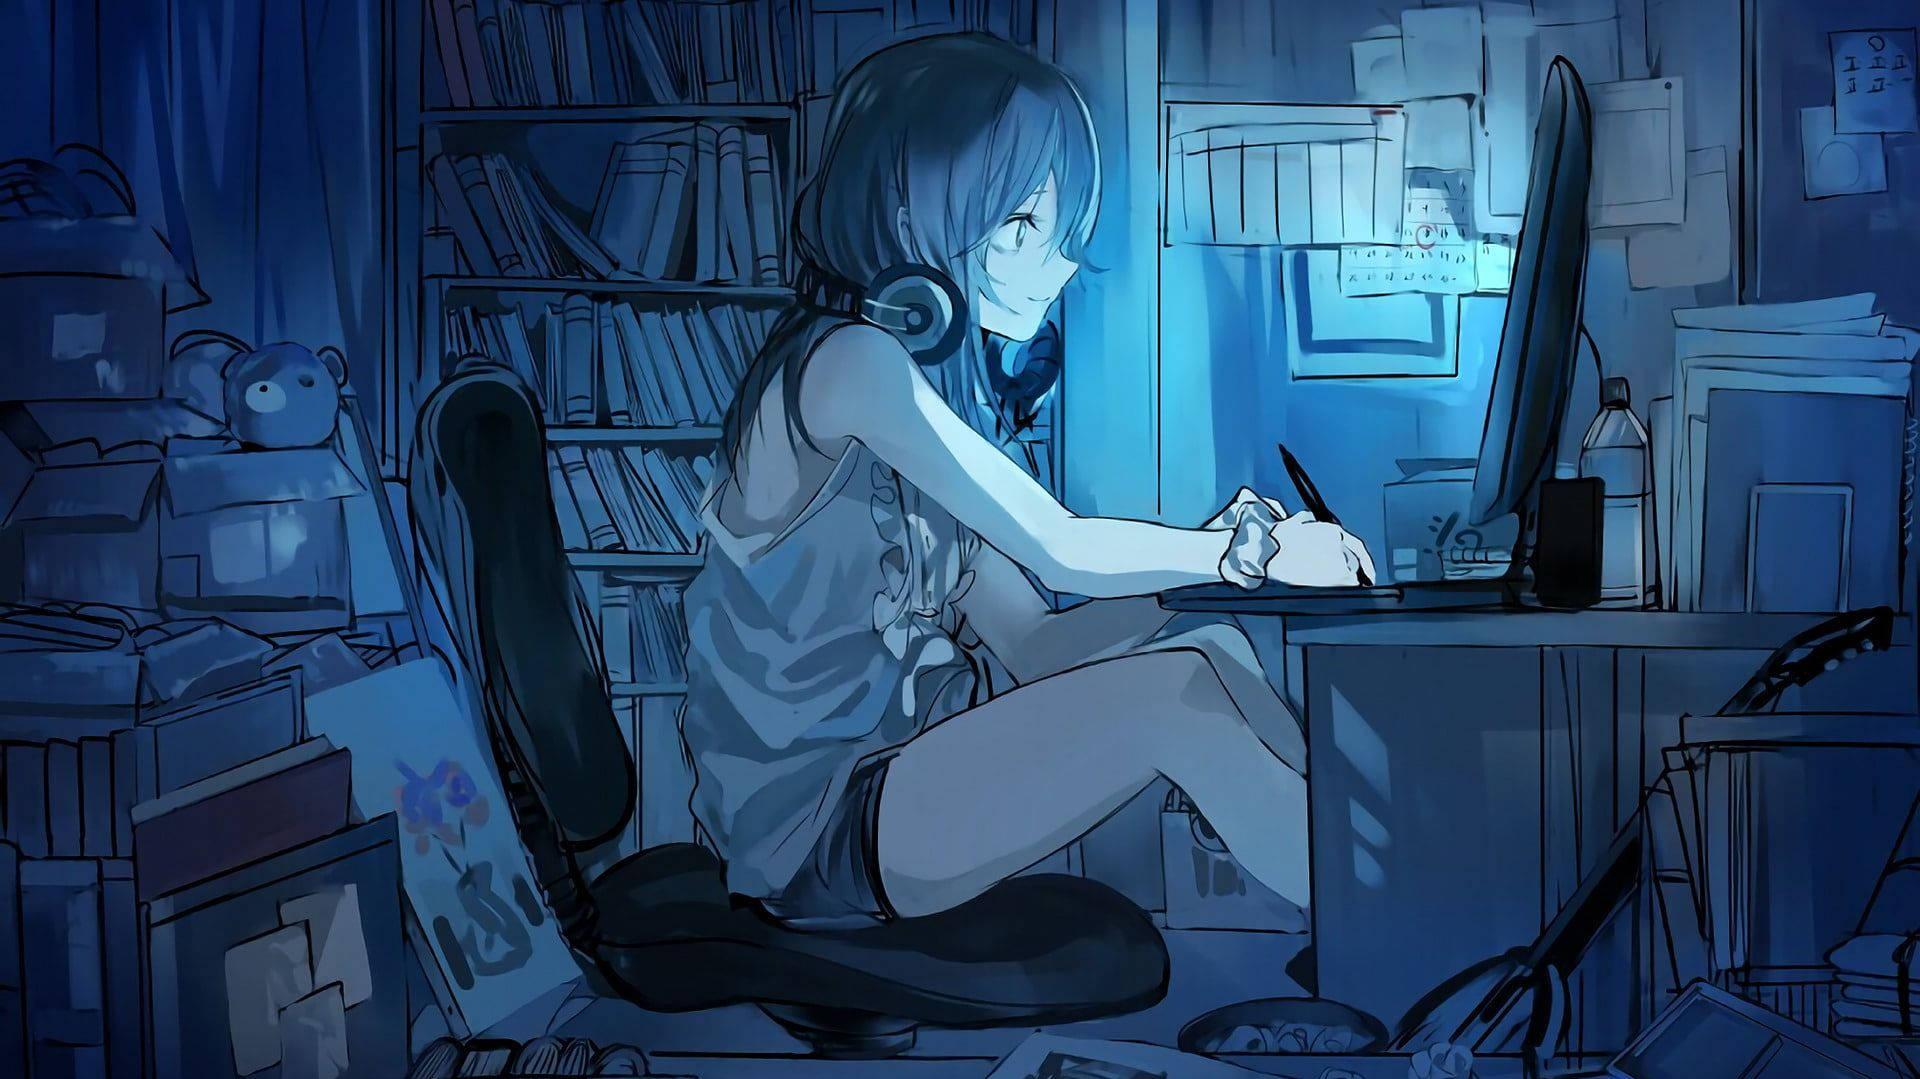 Anime Girl Working With Her Laptop In A Dim Room